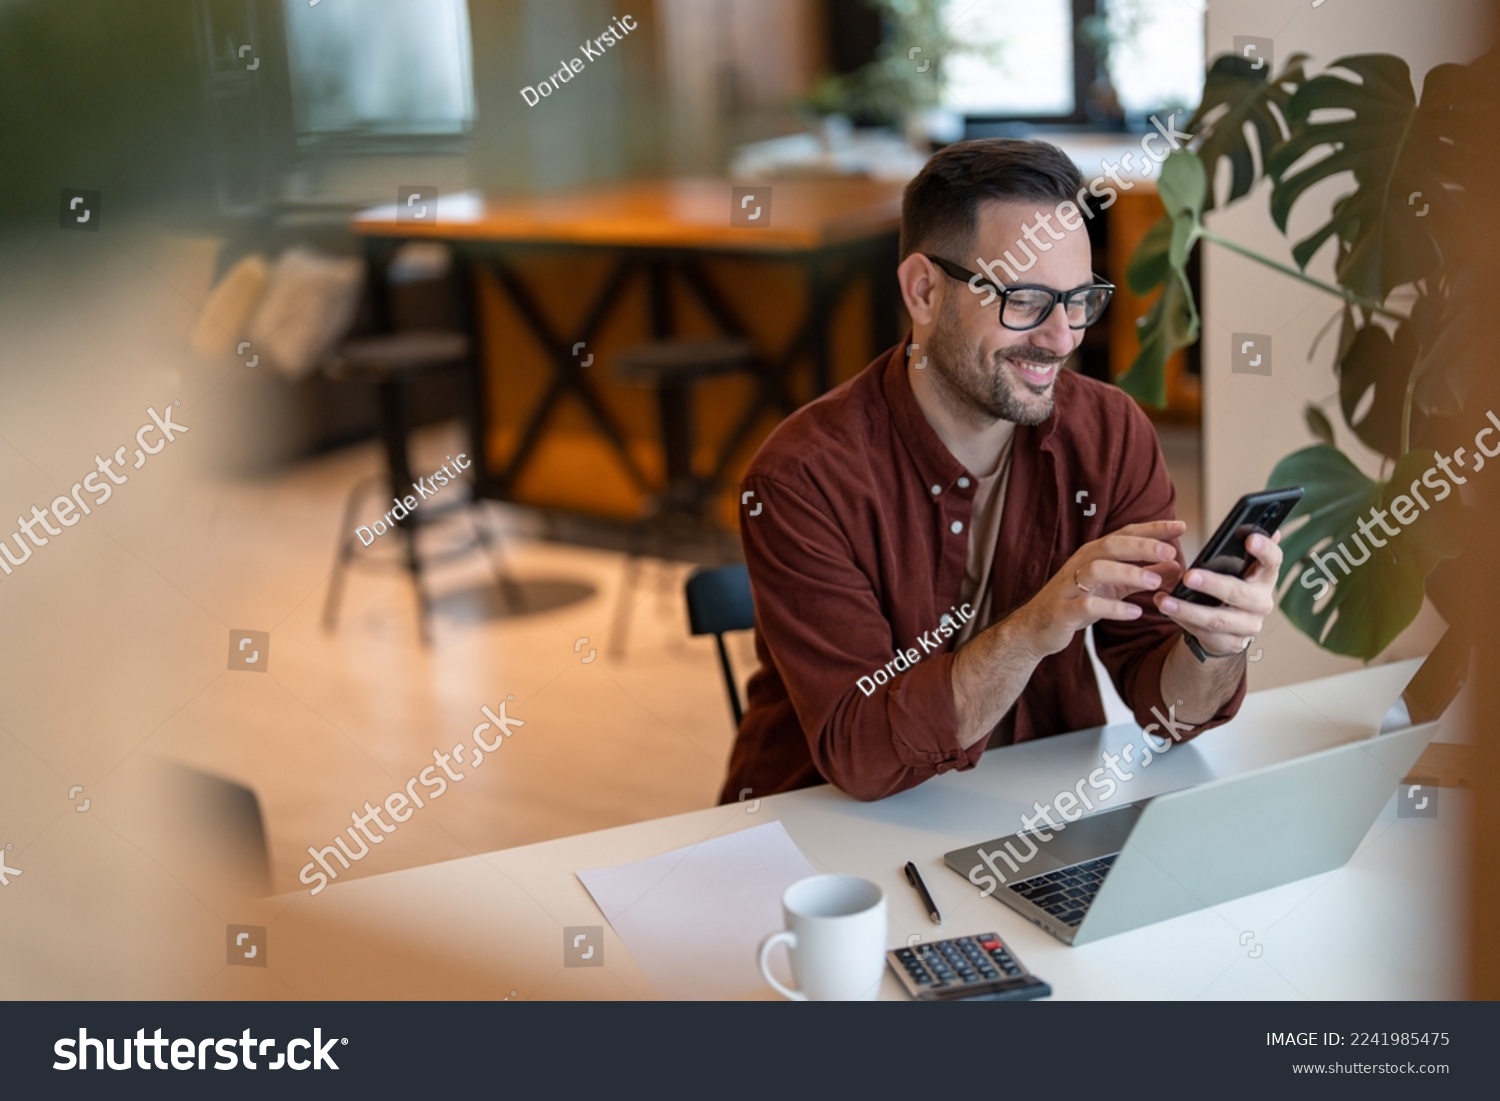 Shot of a young businessman using a smart phone in a home office. Smiling, touching the screen, browsing the internet. #2241985475